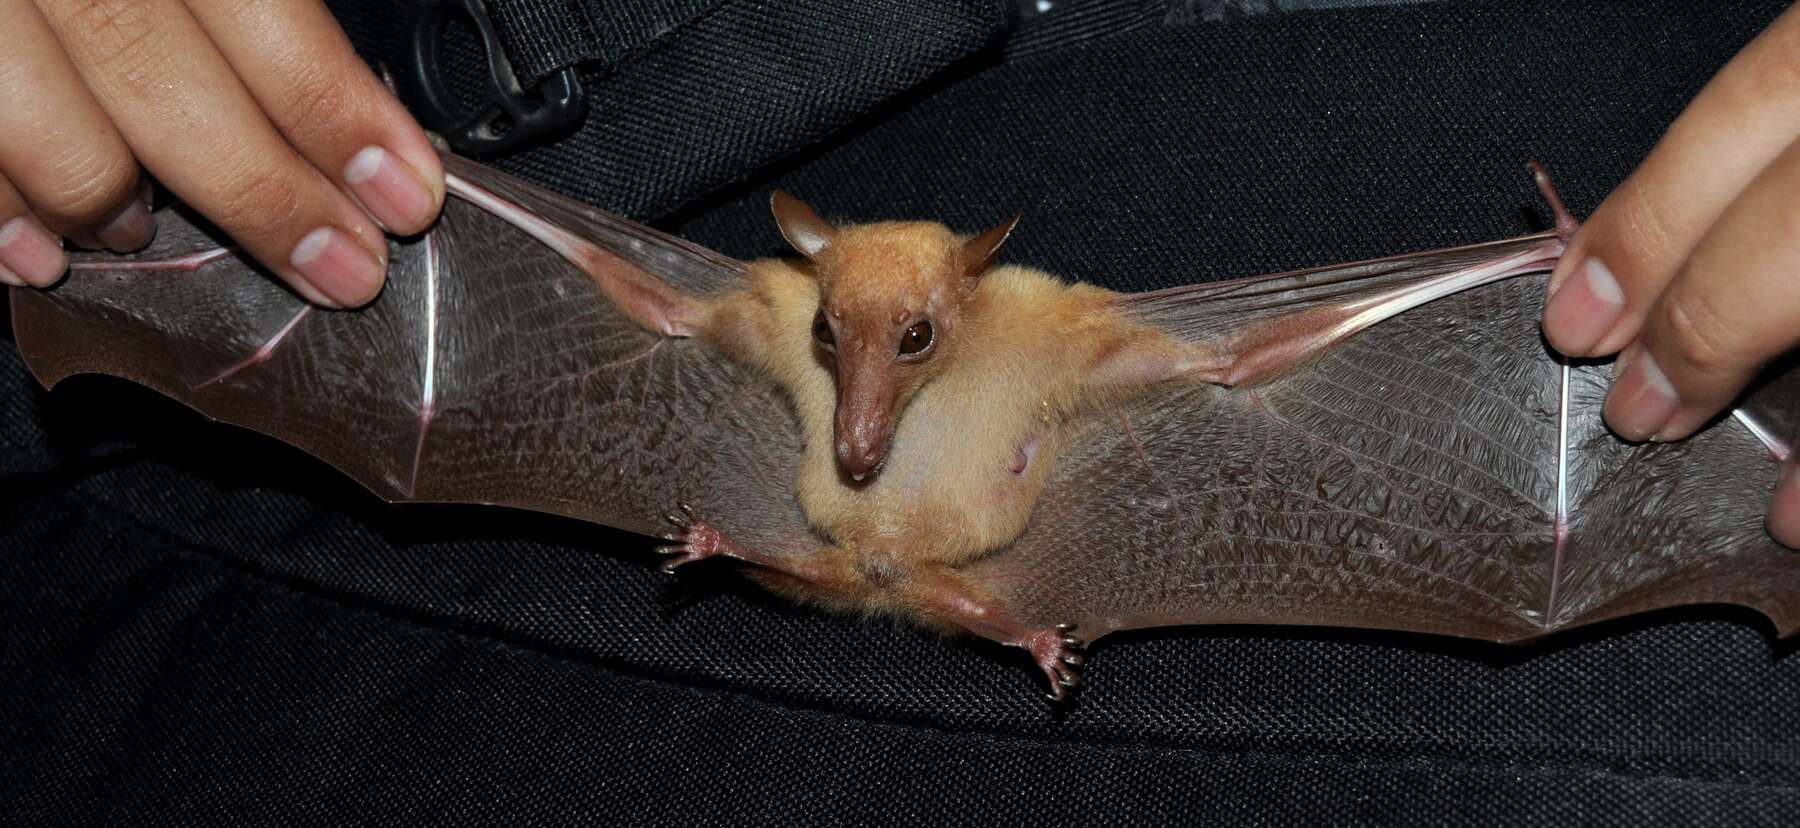 Image of Greater Long-nosed Fruit Bat